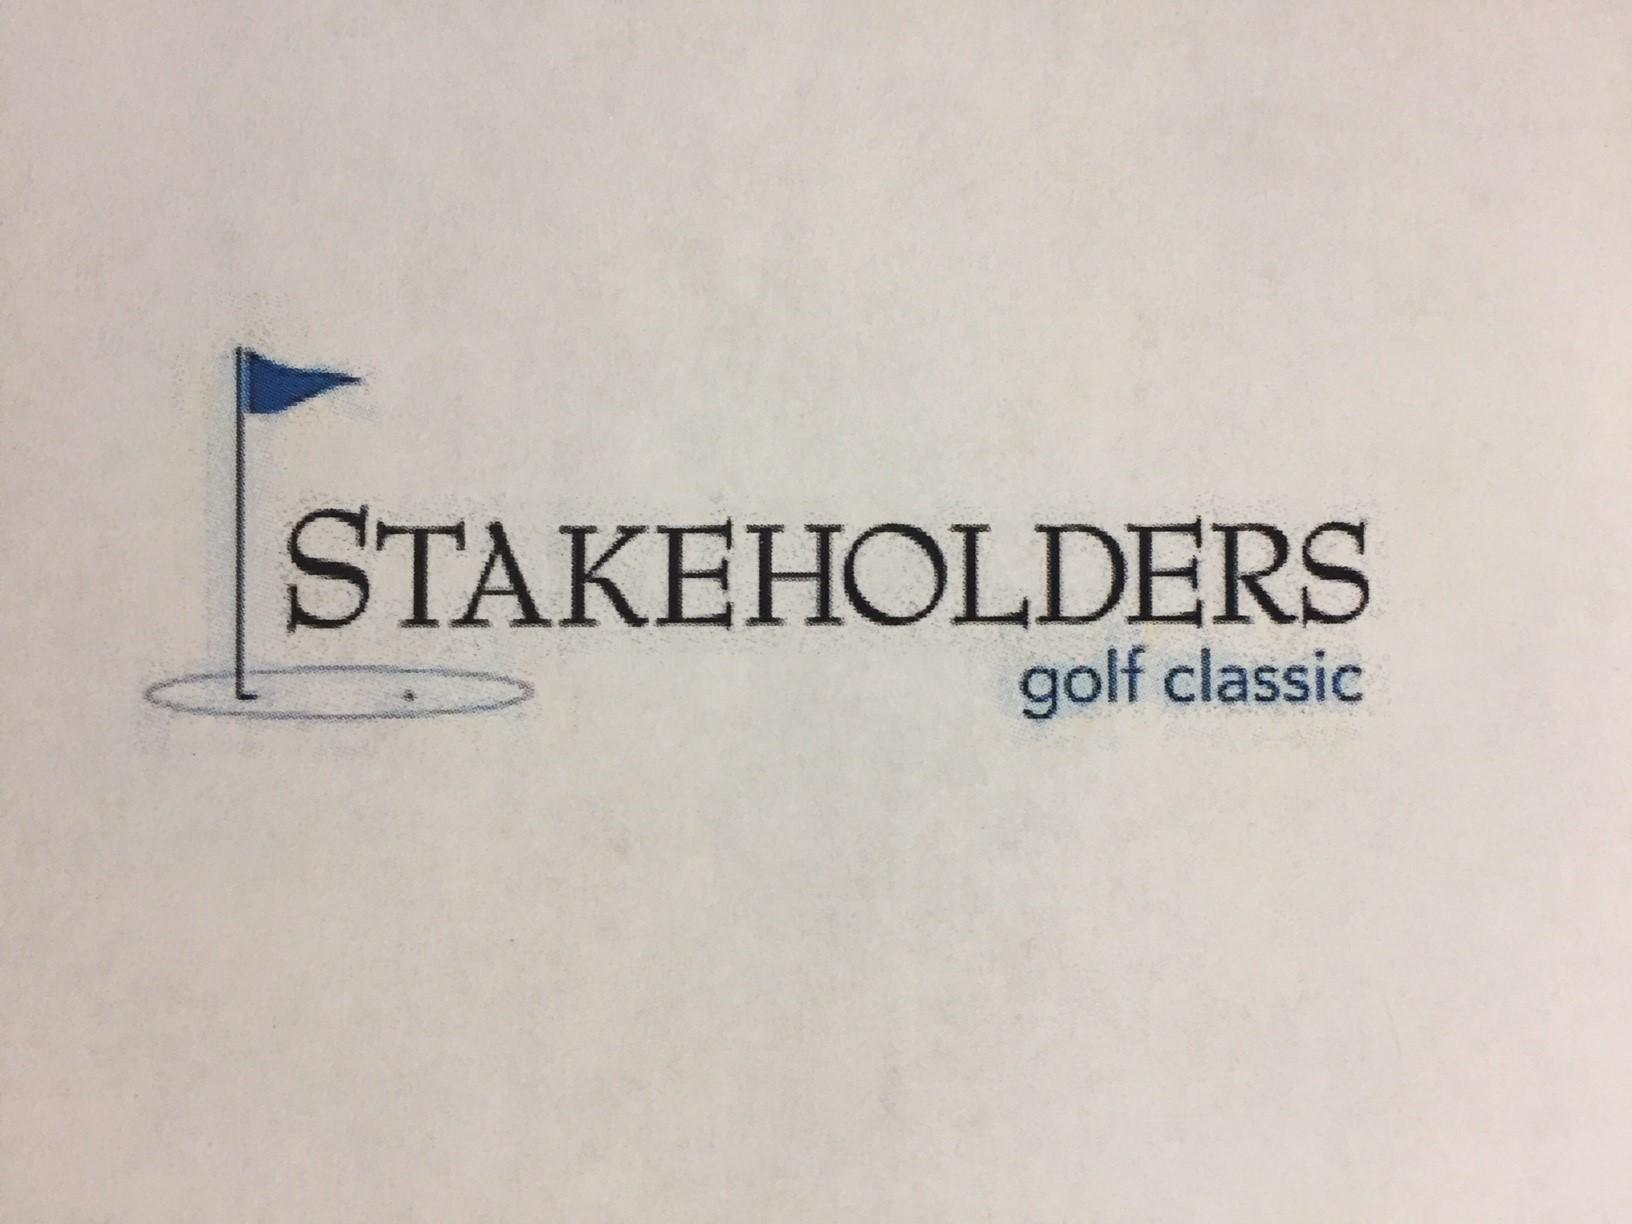 7th Annual Stakeholders Golf Classic